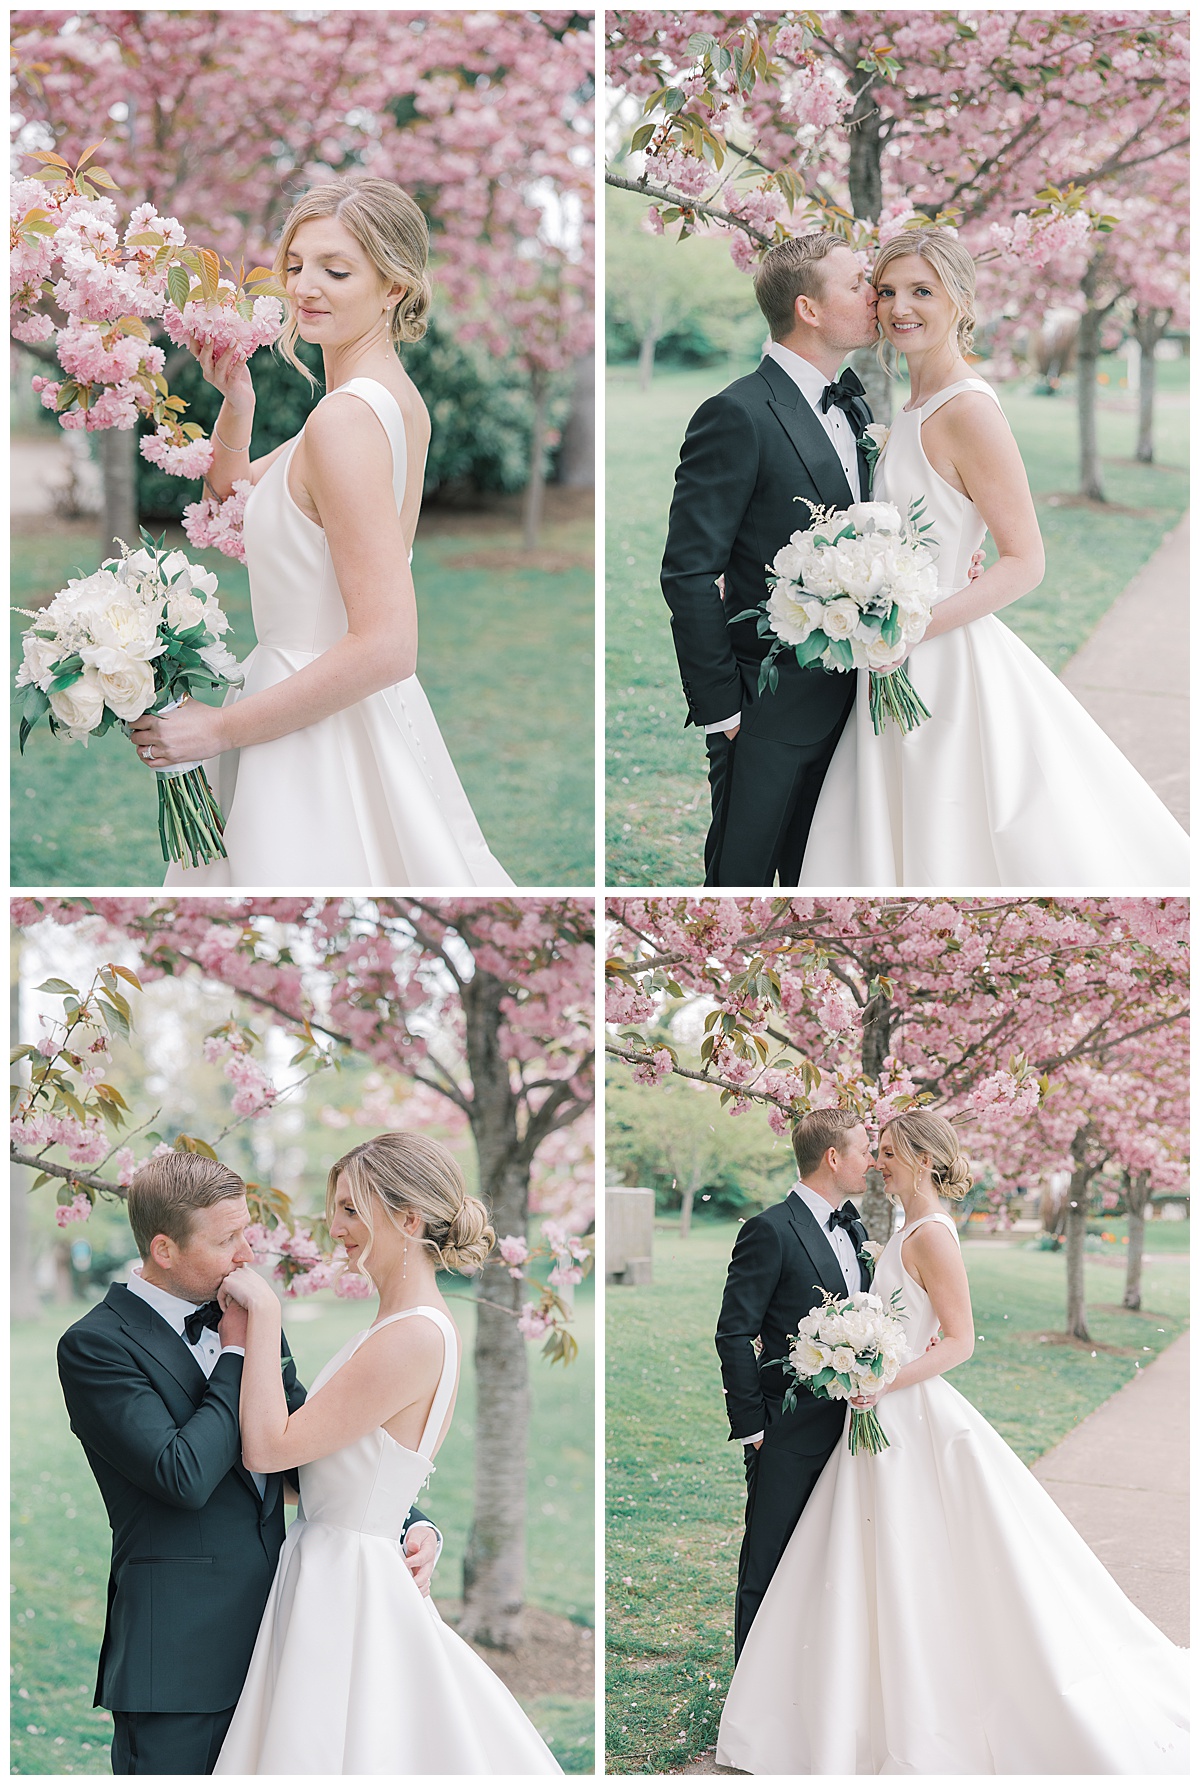 Groom kisses brides hand under cherry blossoms at Divine Park in Spring Lake.